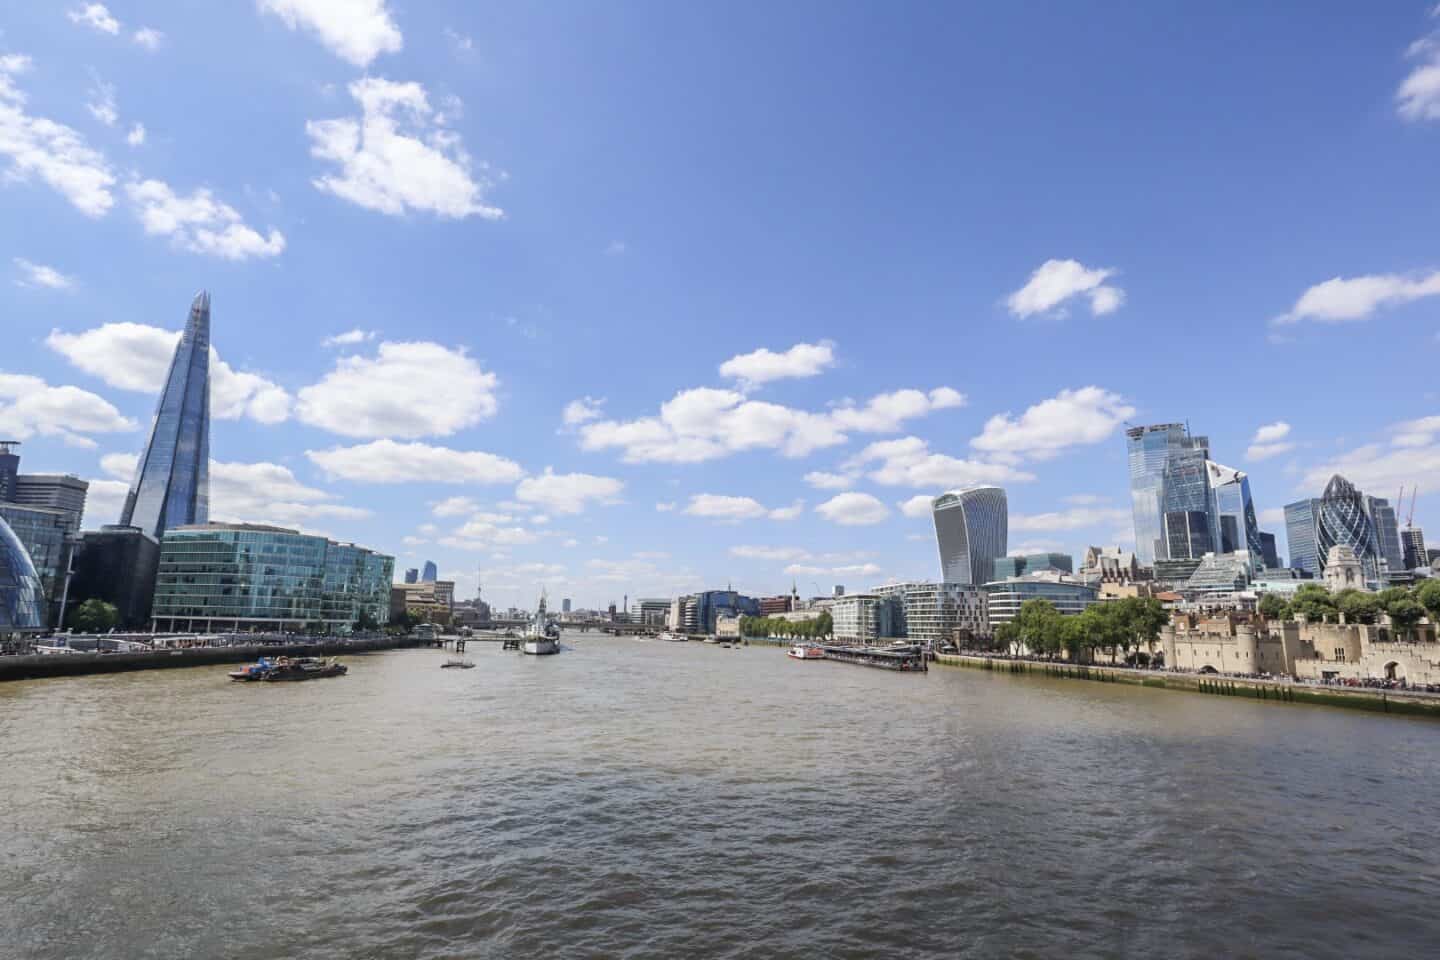 View of River Thames, Shard and City from Tower Bridge | London River Thames Walk